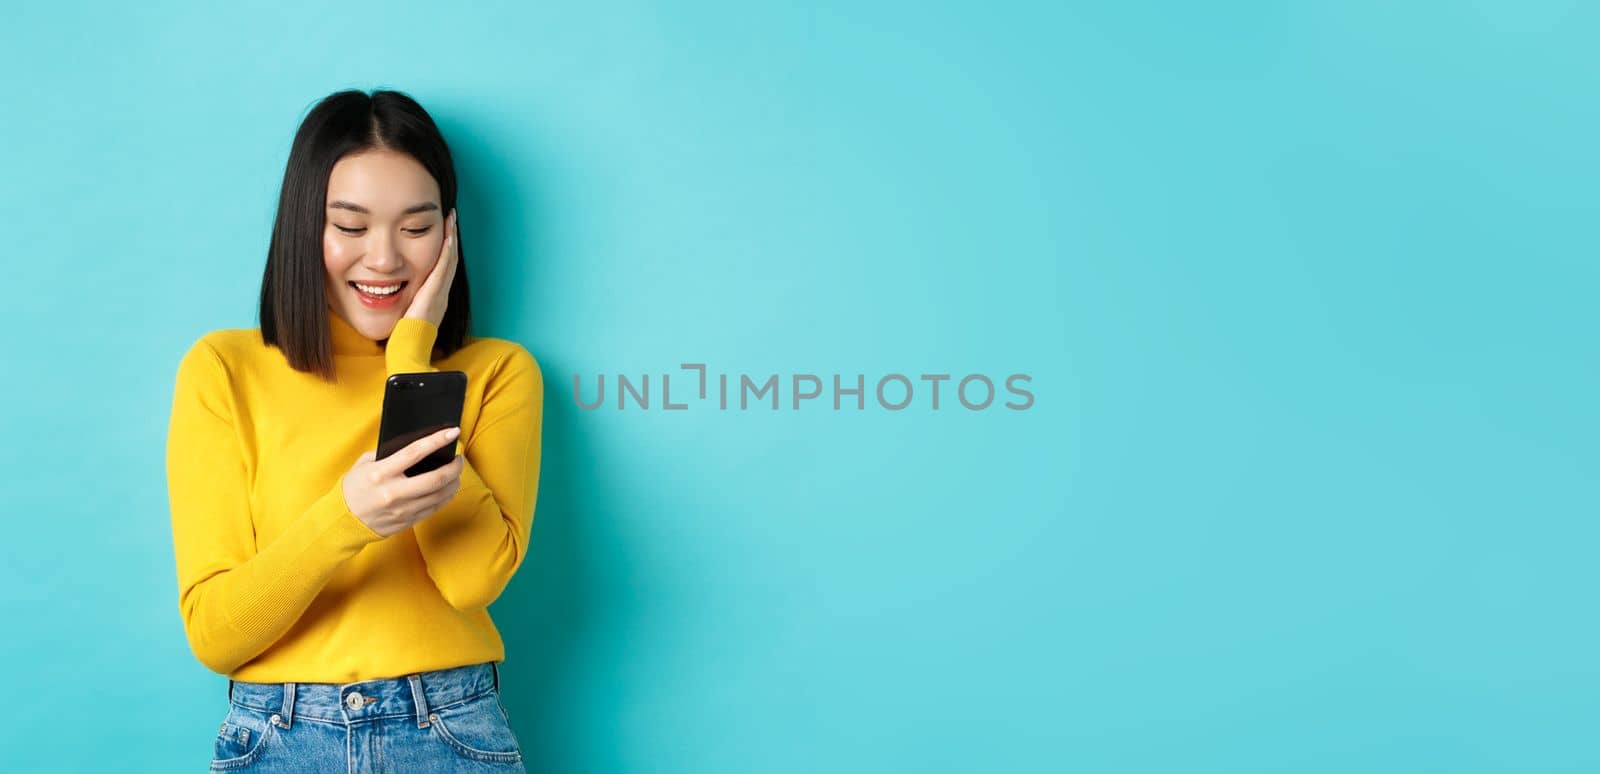 Image of happy asian woman reading message on mobile phone screen and smiling, chat in smartphone app, standing over blue background.